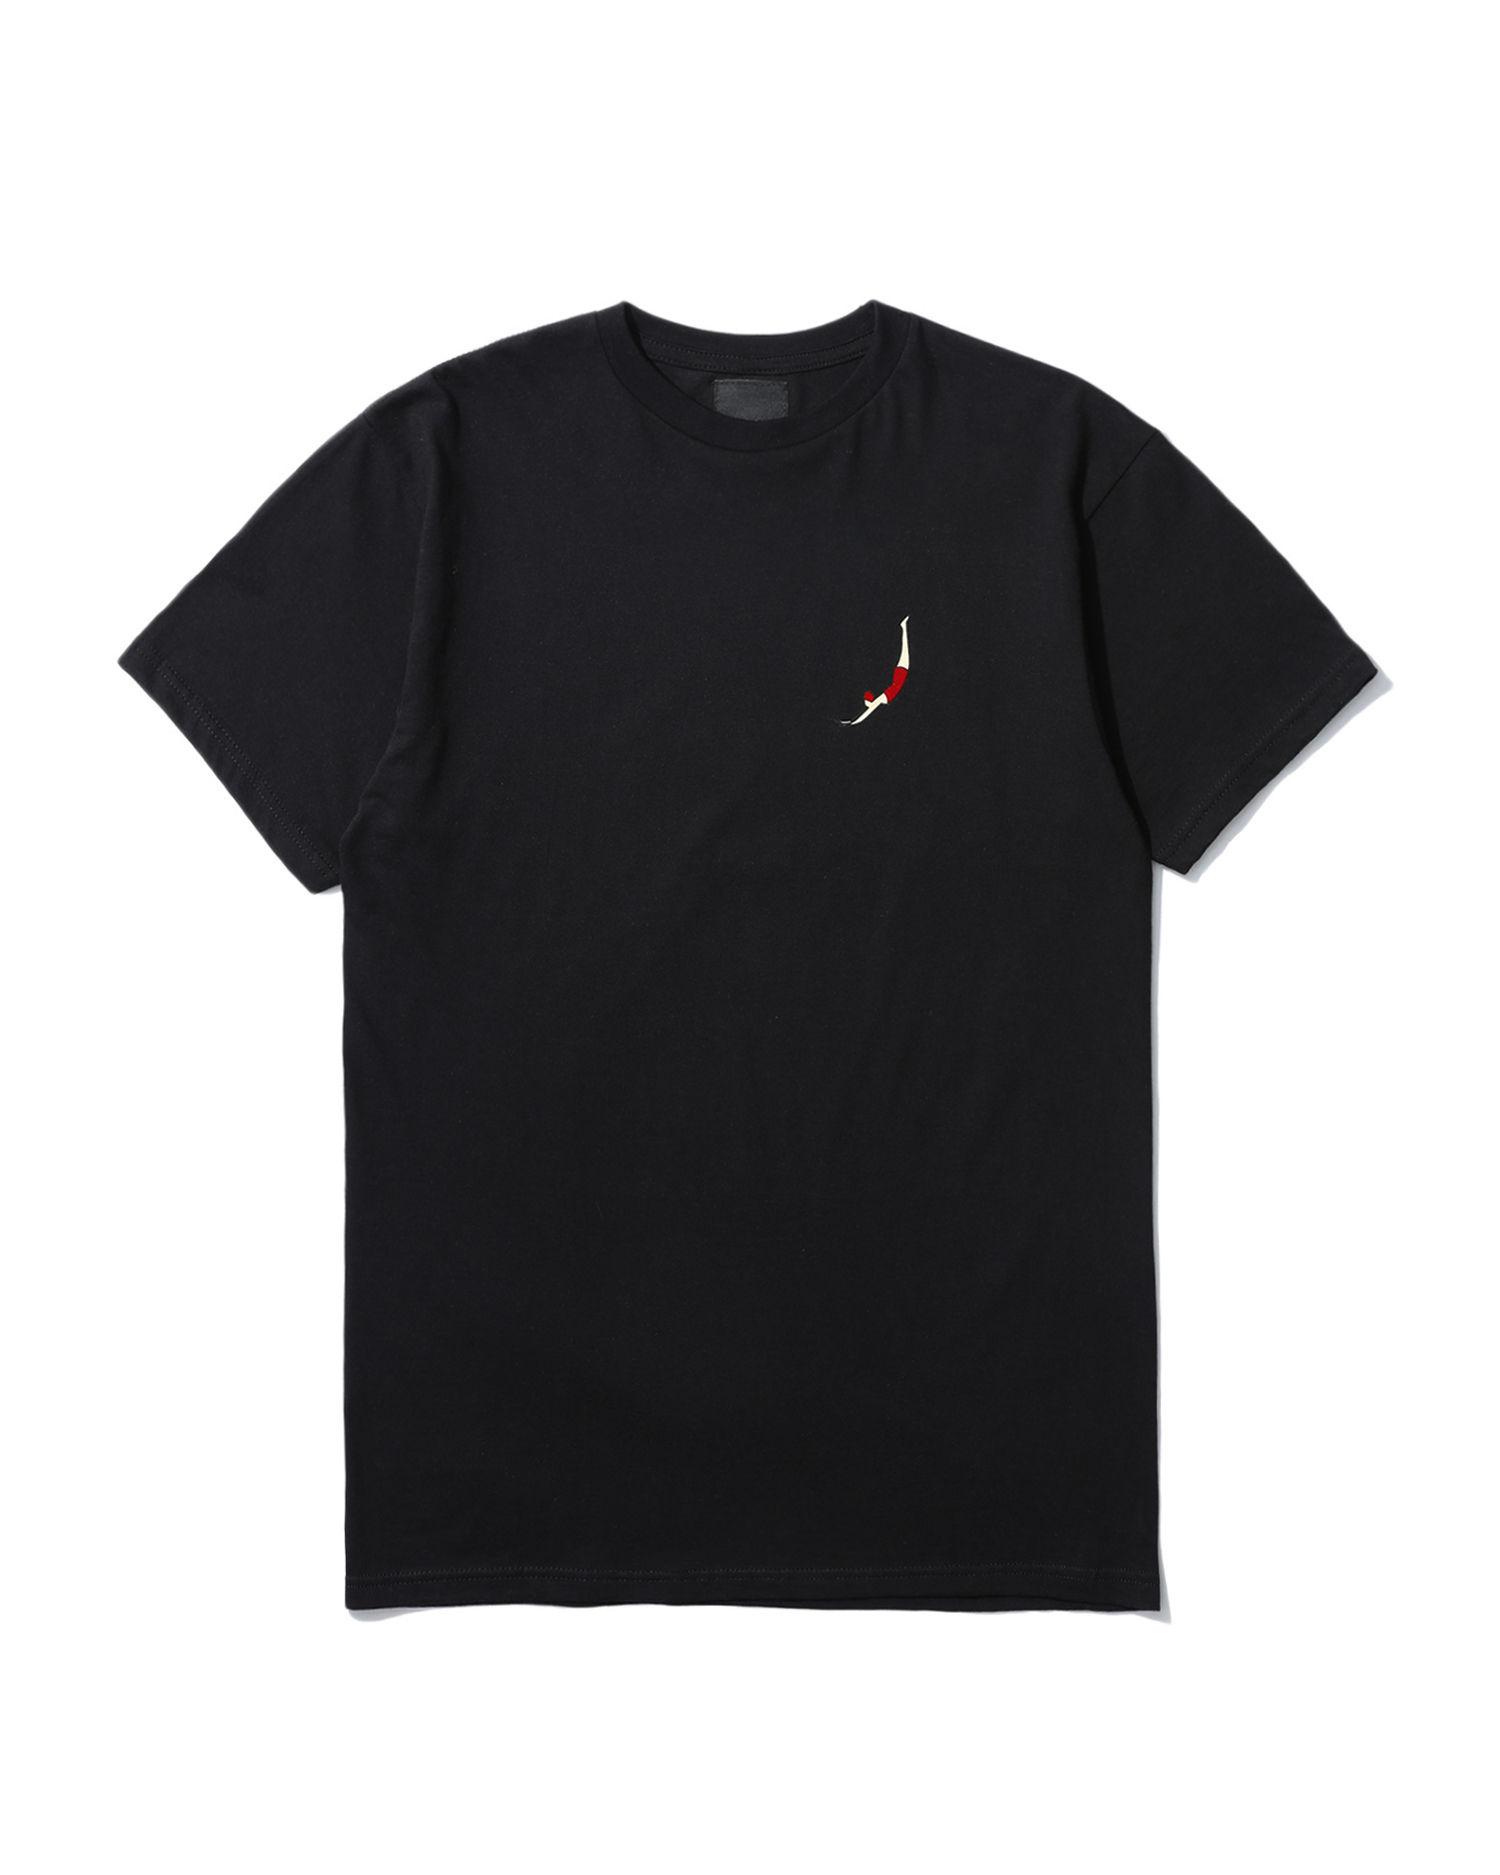 Swan Dive tee by AFTER MIDNIGHT